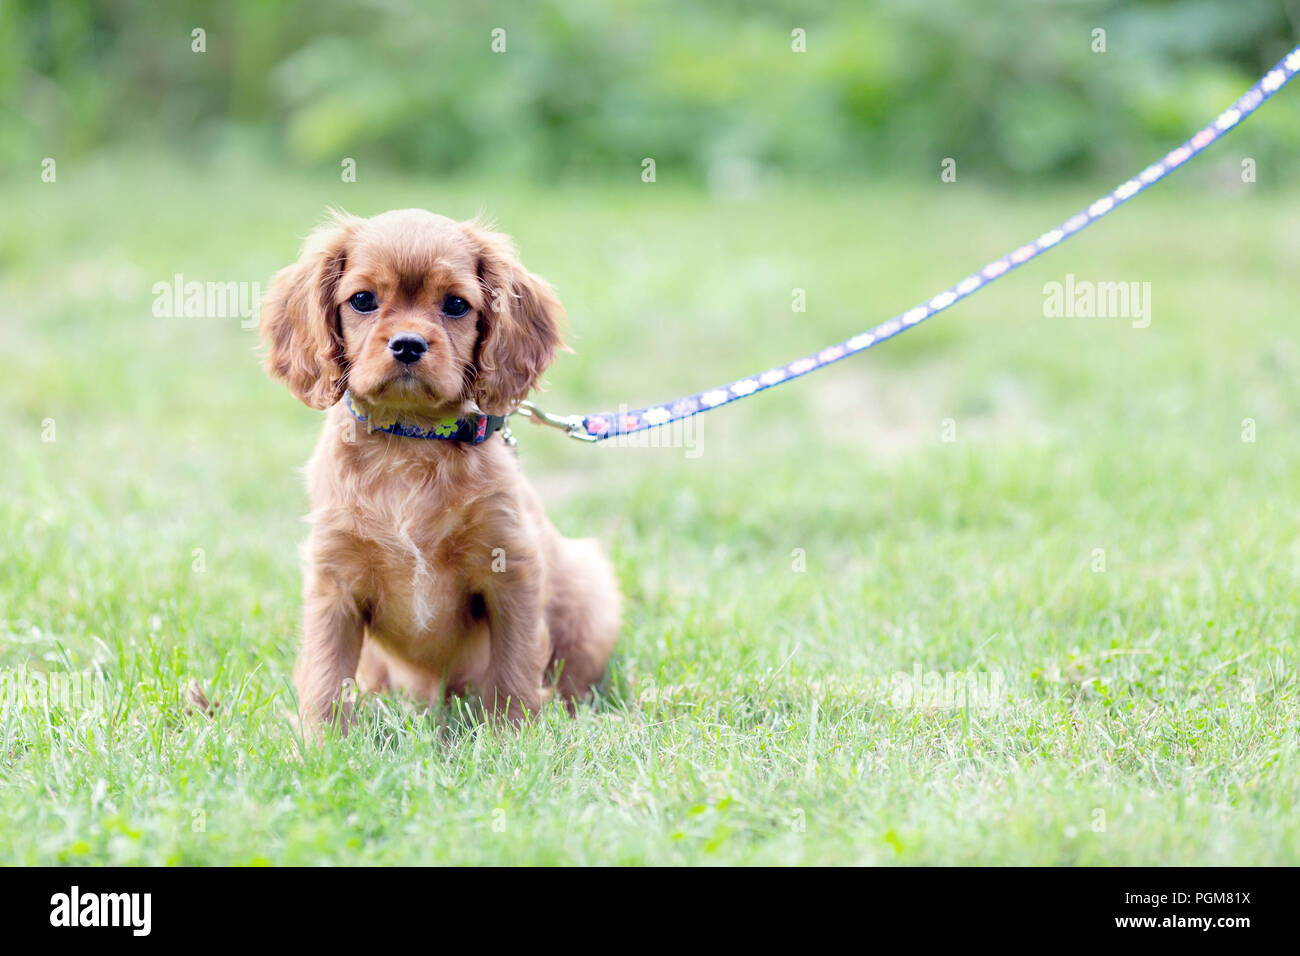 Cute puppy on the leash sitting on the grass Stock Photo